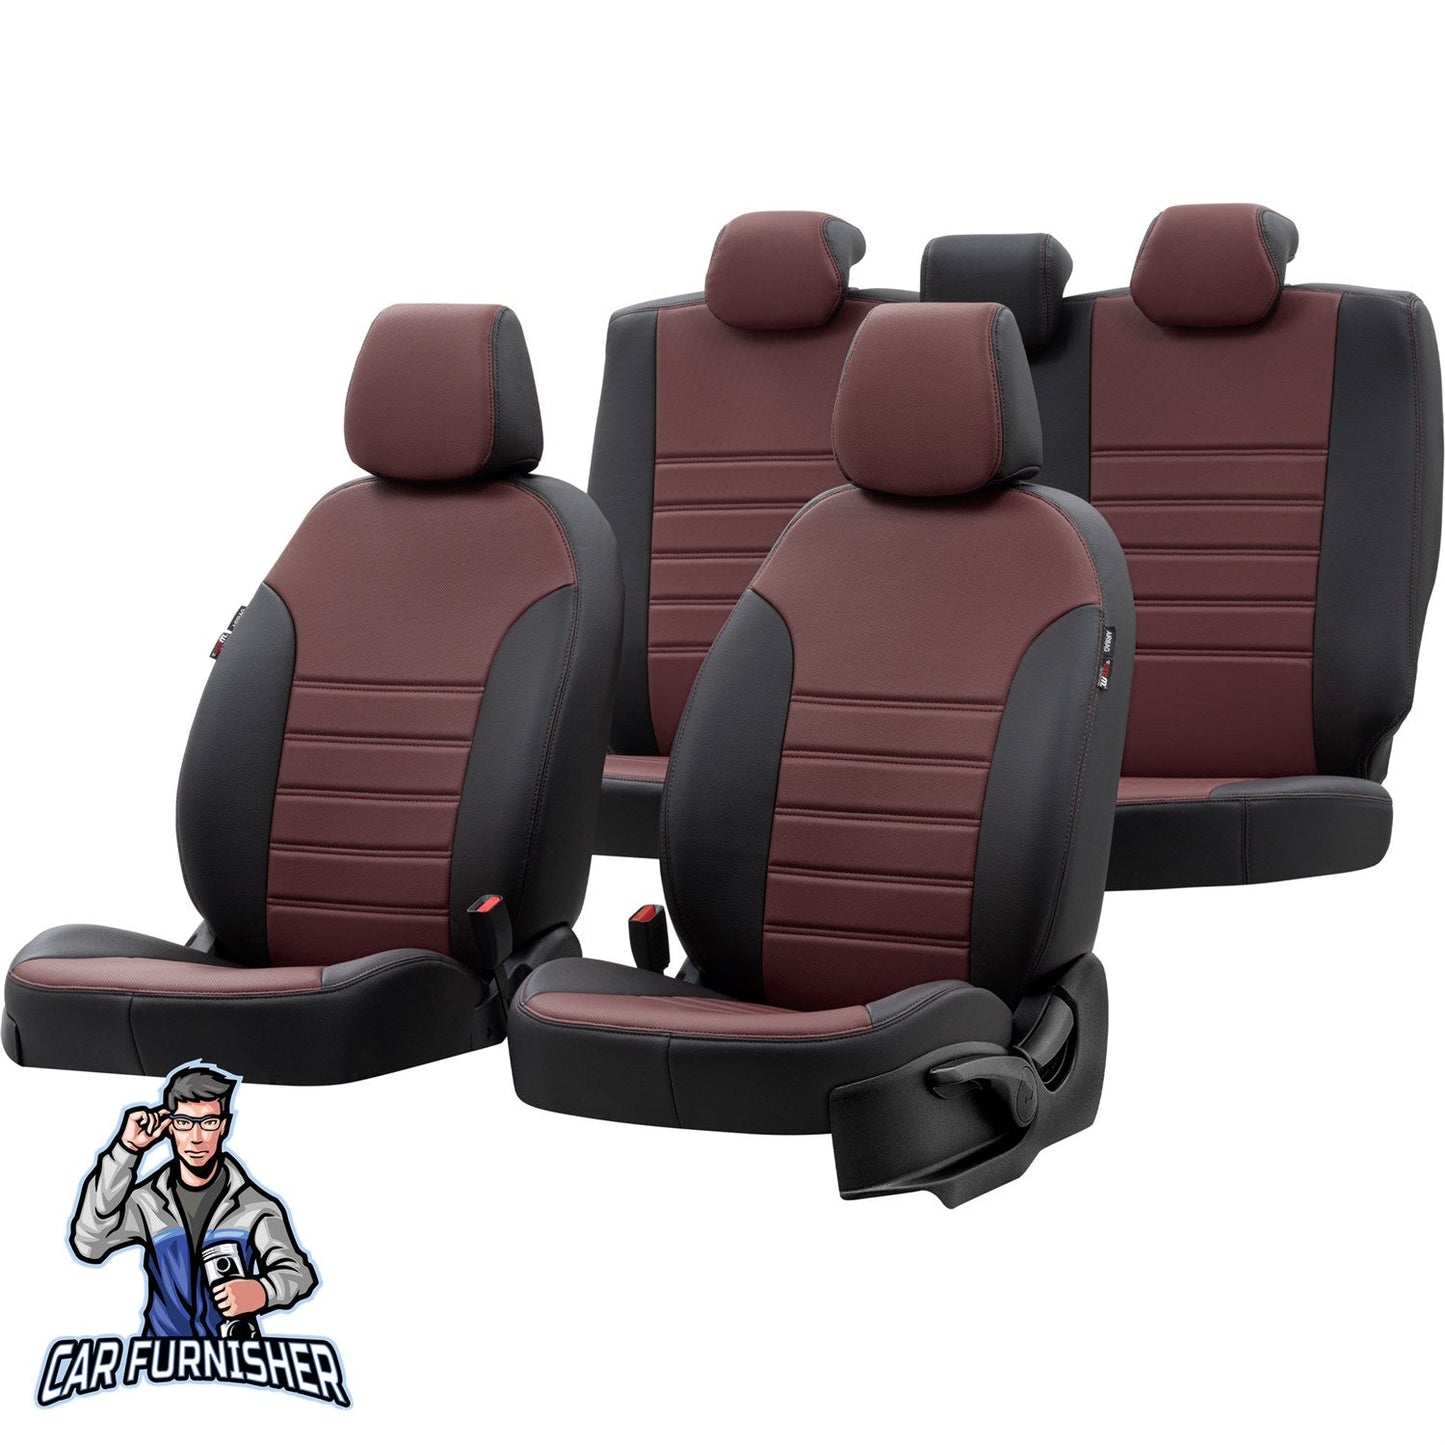 Volvo S80 Seat Cover Istanbul Leather Design Burgundy Leather